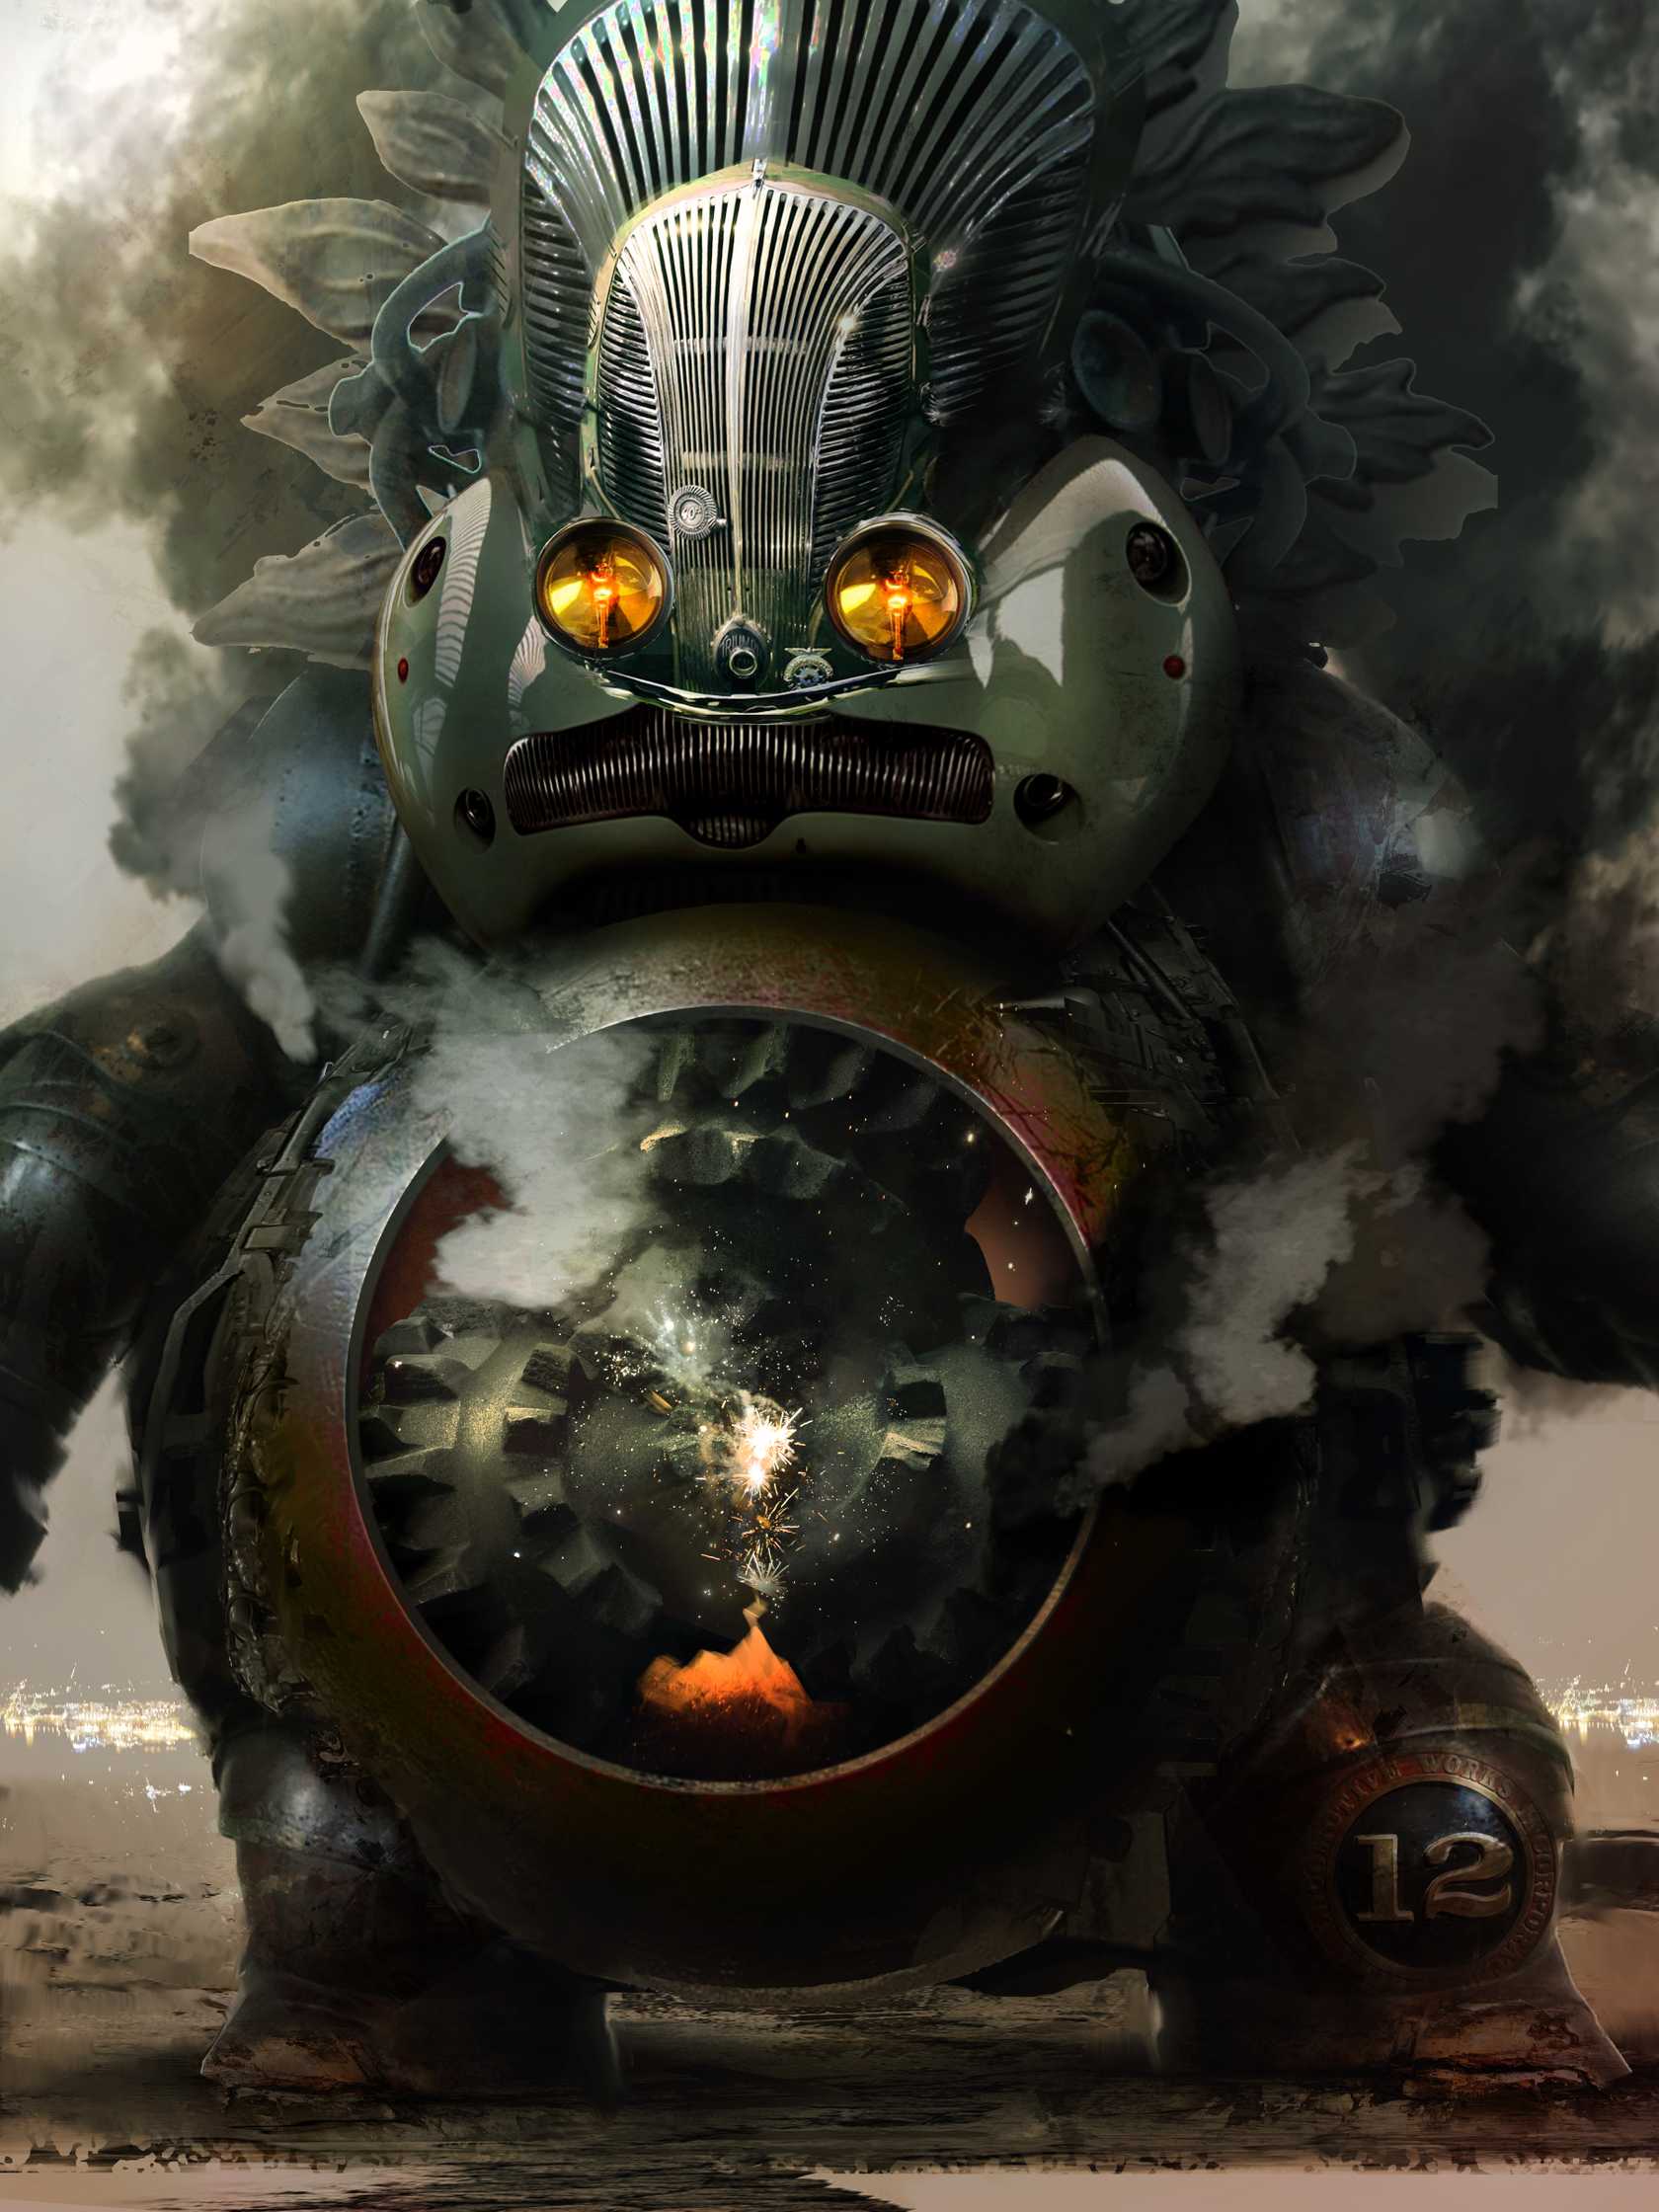 A gargantuan mechanical creation, with the an old car grill and headlights for eyes, and a belly full of grinding, sparking, smoking sperhical gears.